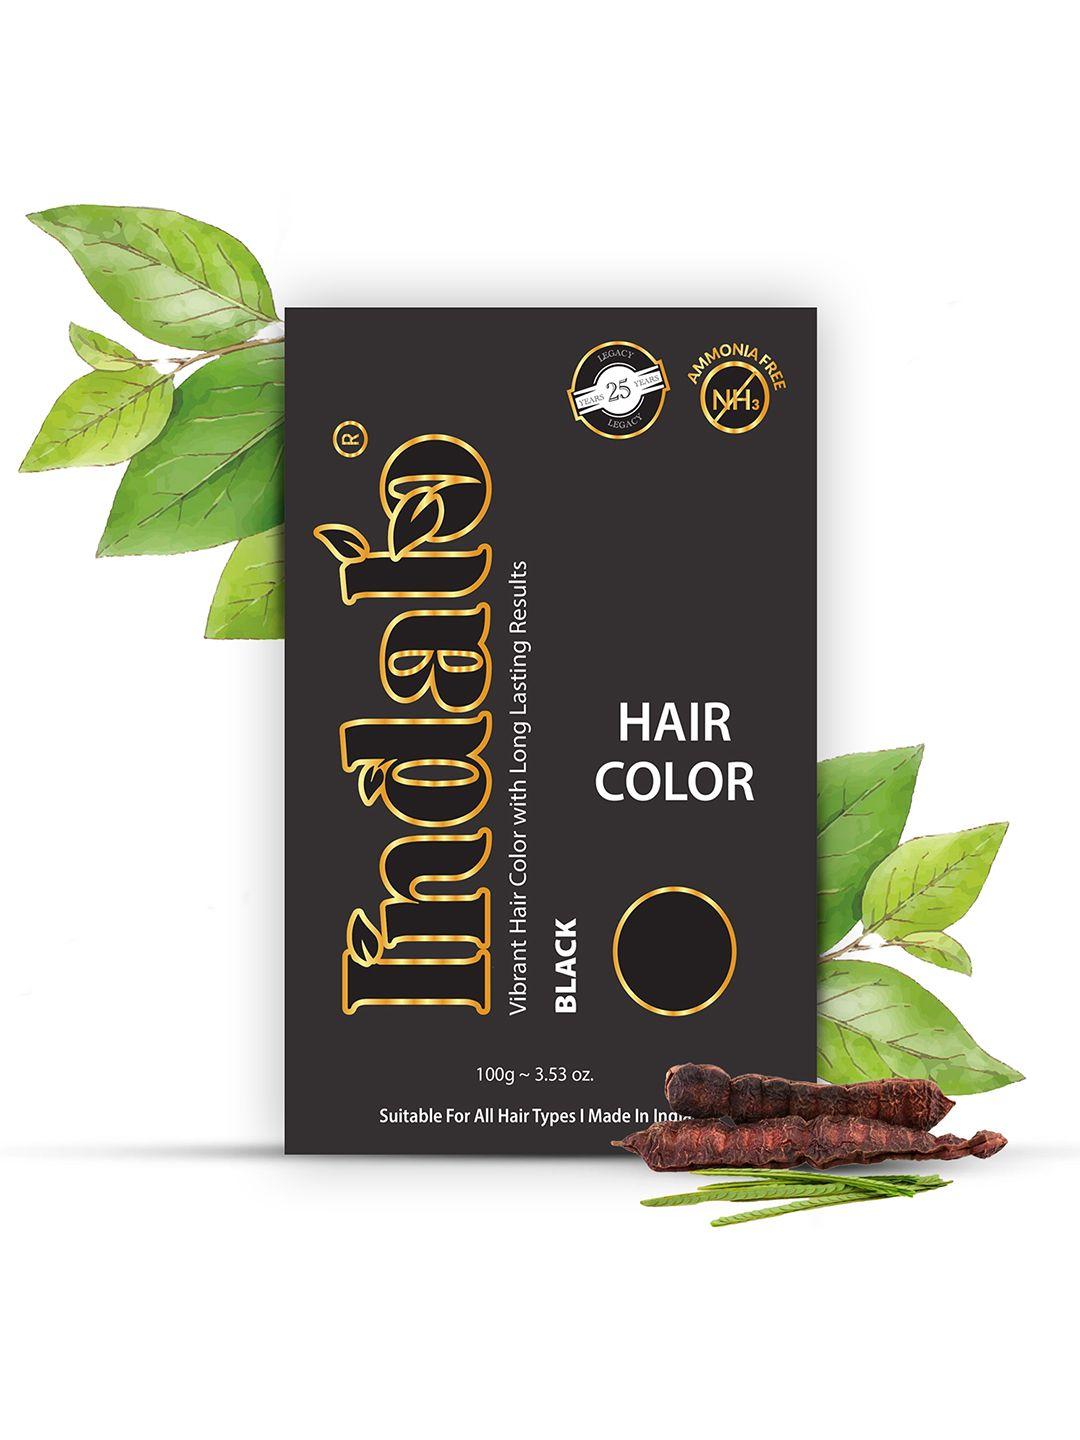 indalo set of 2 ammonia-free vibrant hair color with natural ingredient 100g each - black